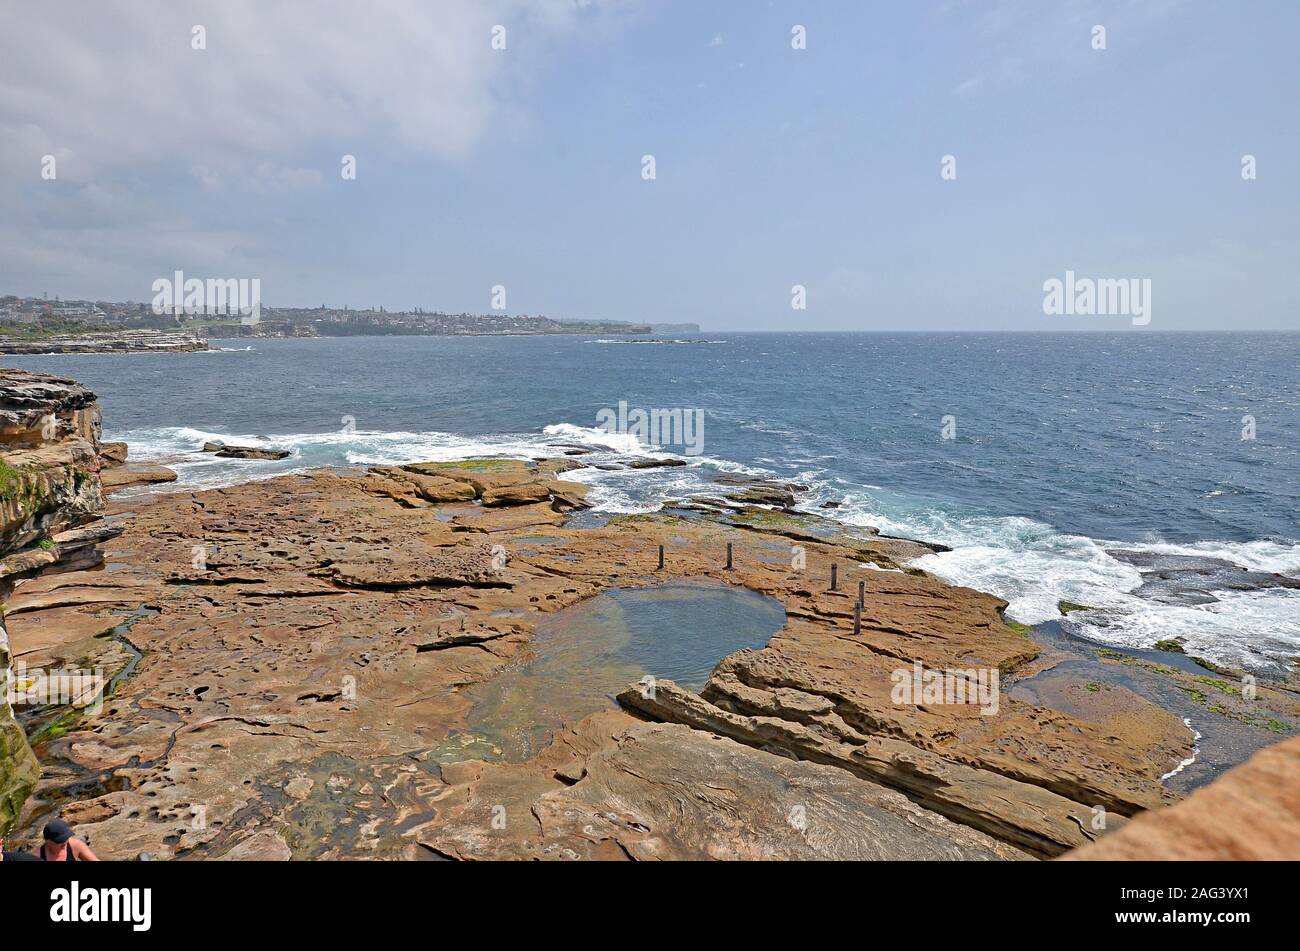 One of the most beautiful coastal walks listed in Sydney starting from iconic Bondi beach and leading to Maroubra beach, Australia Stock Photo